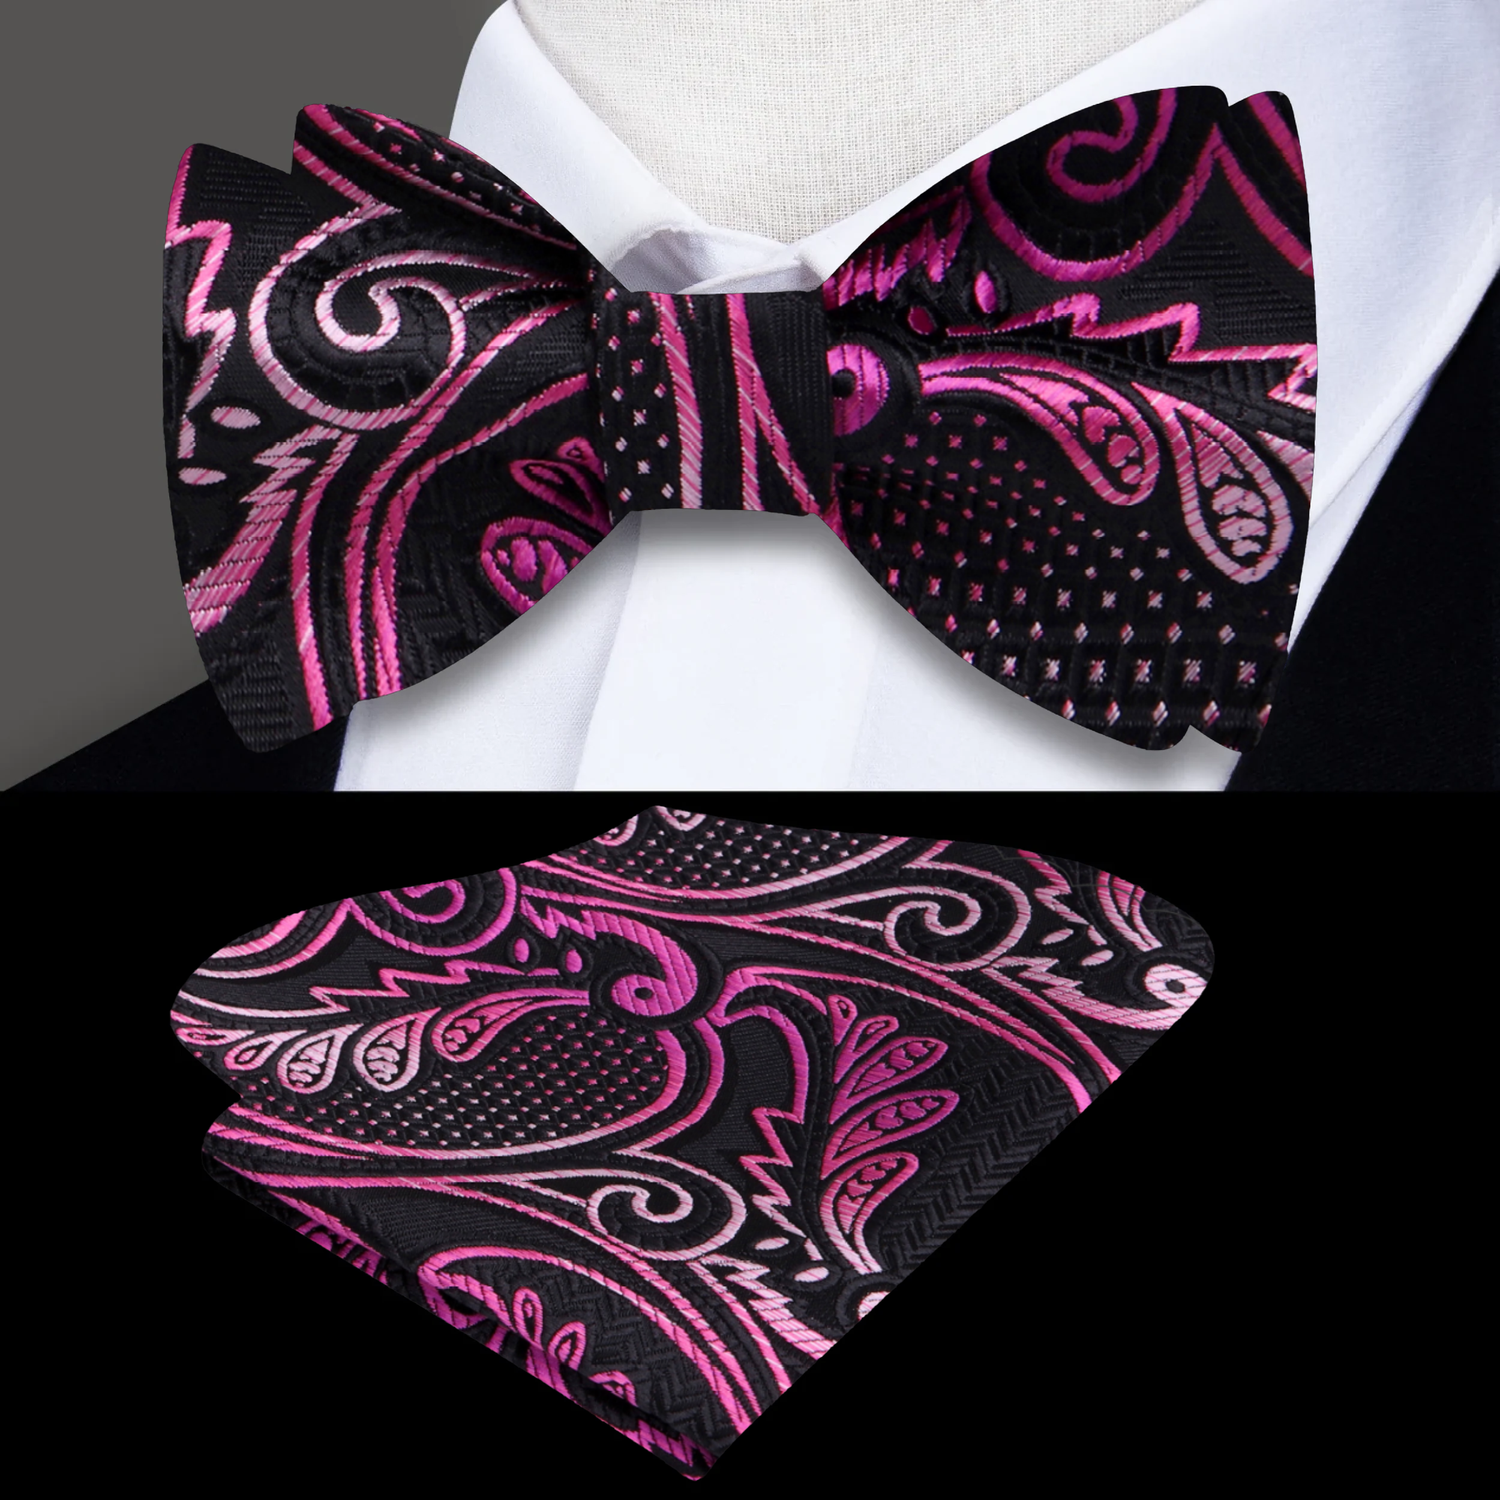 A Black, Pink Paisley Pattern Silk Self Tie Bow Tie, Matching Pocket Square